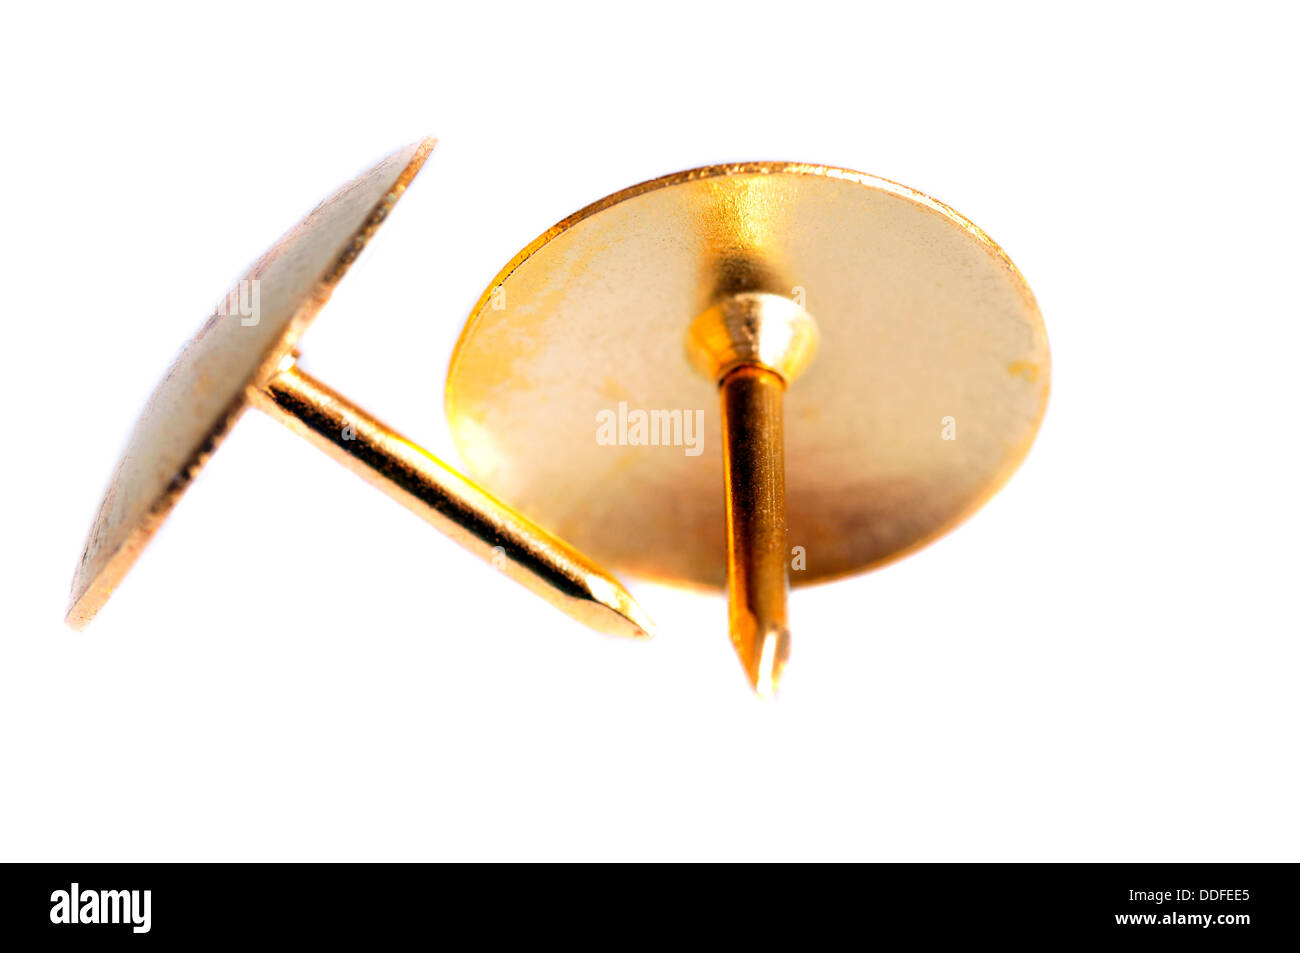 Two golden pin tacks isolated on a white background Stock Photo